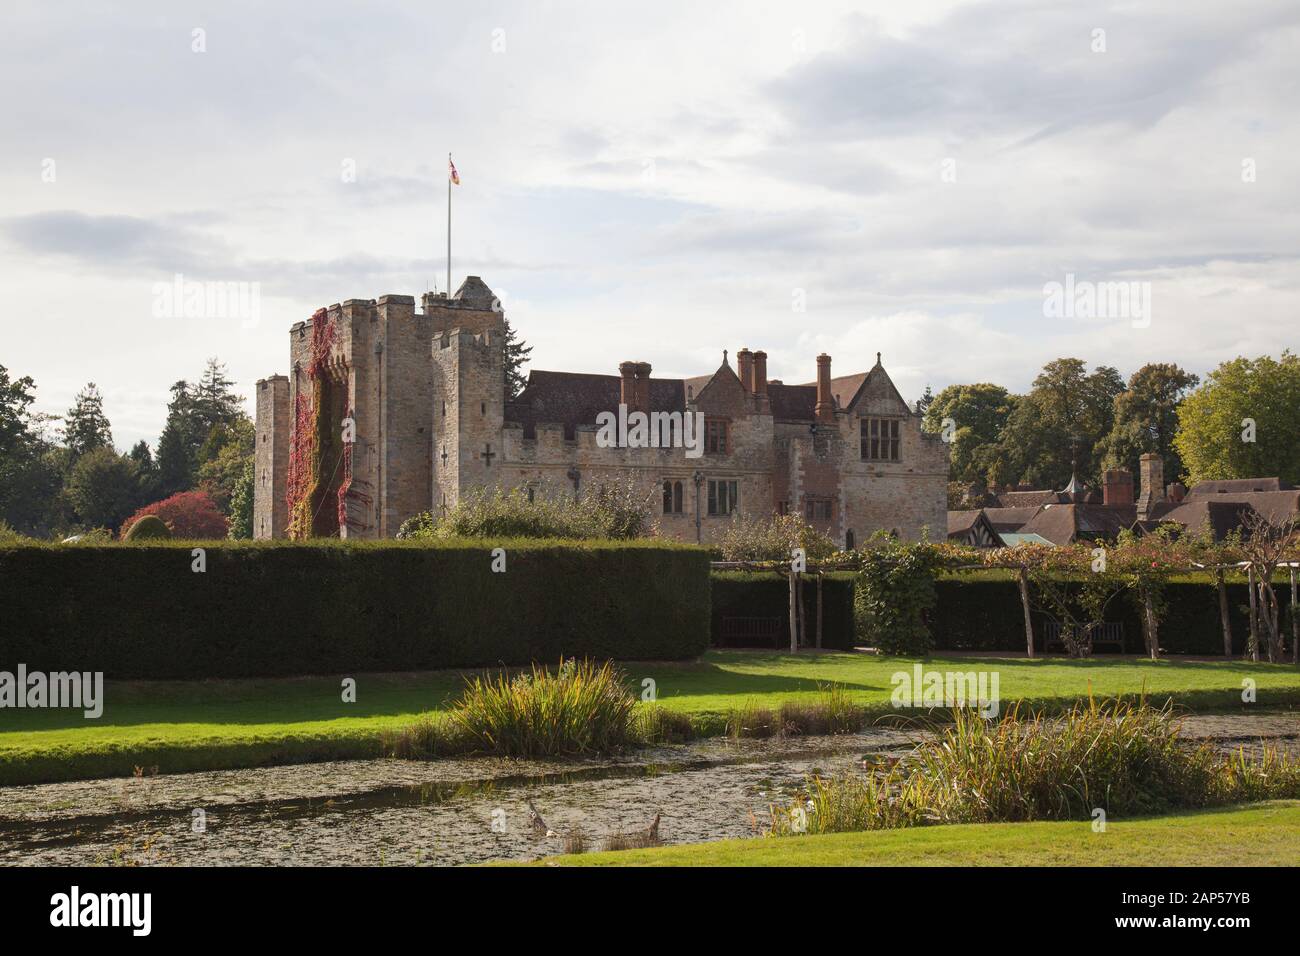 Hever Castle, the Former Home of the Boleyn Family, Behind Hedges and Garden Plants, in the Village of Hever, Kent, United Kingdom Stock Photo